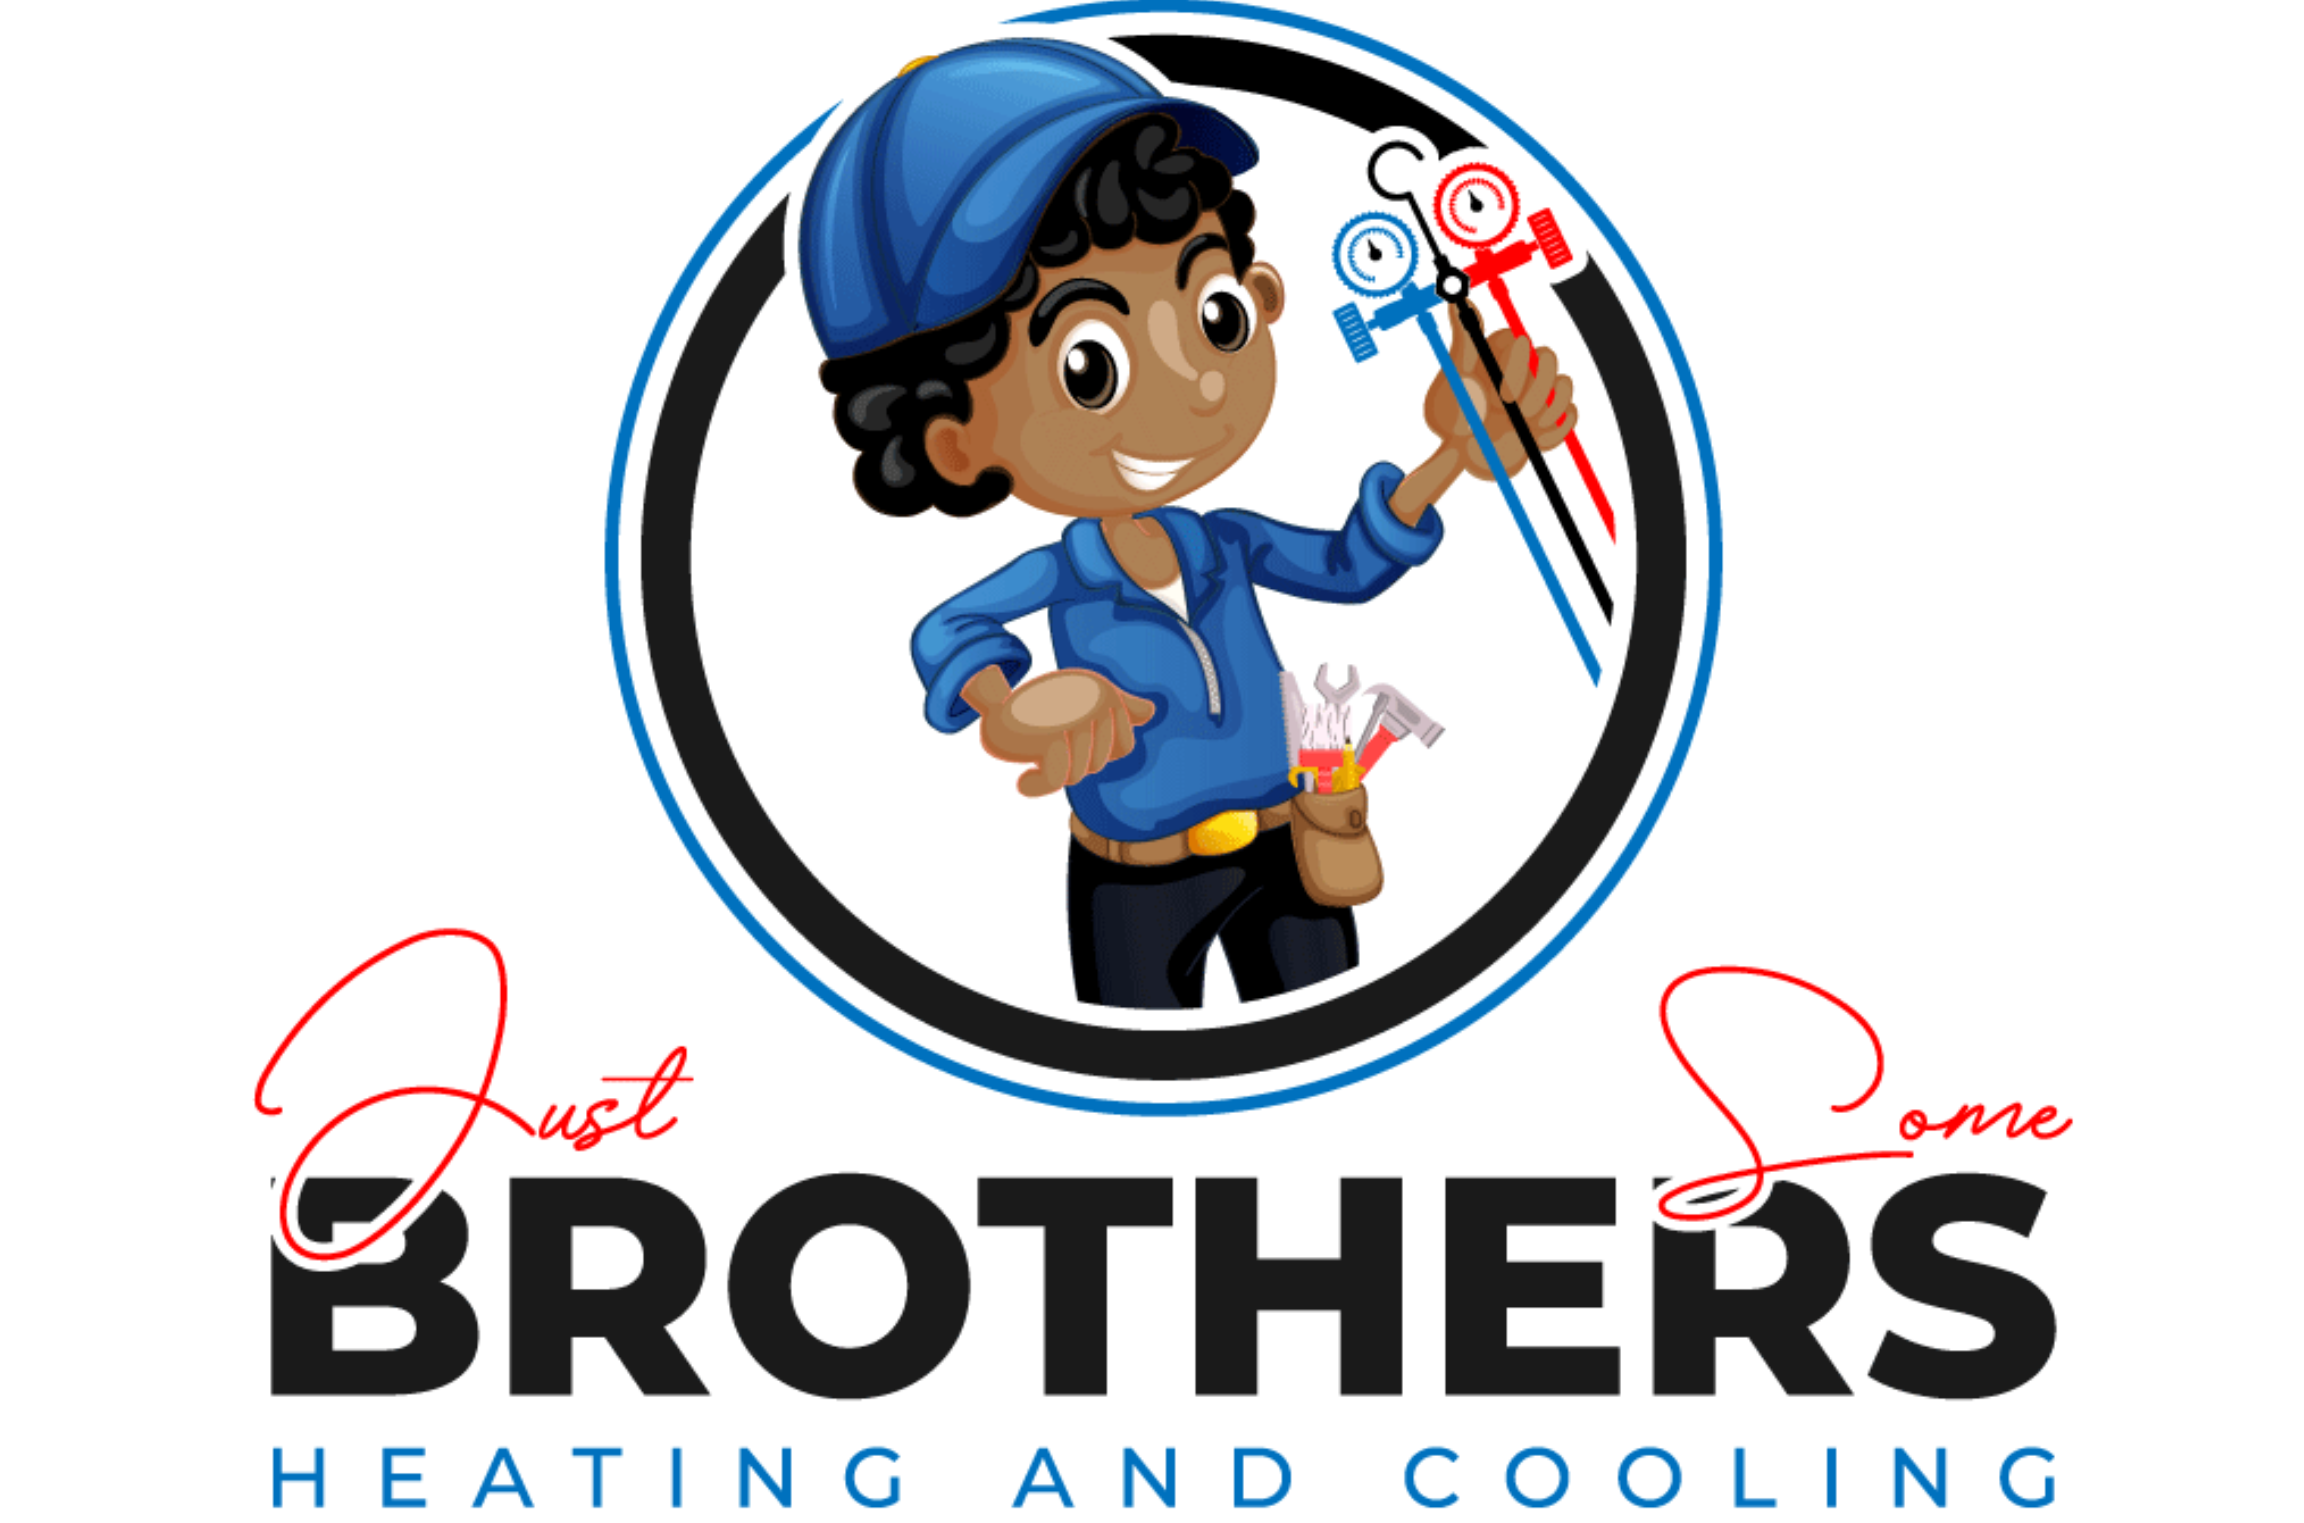 Just Some Brothers Heating and Cooling Logo